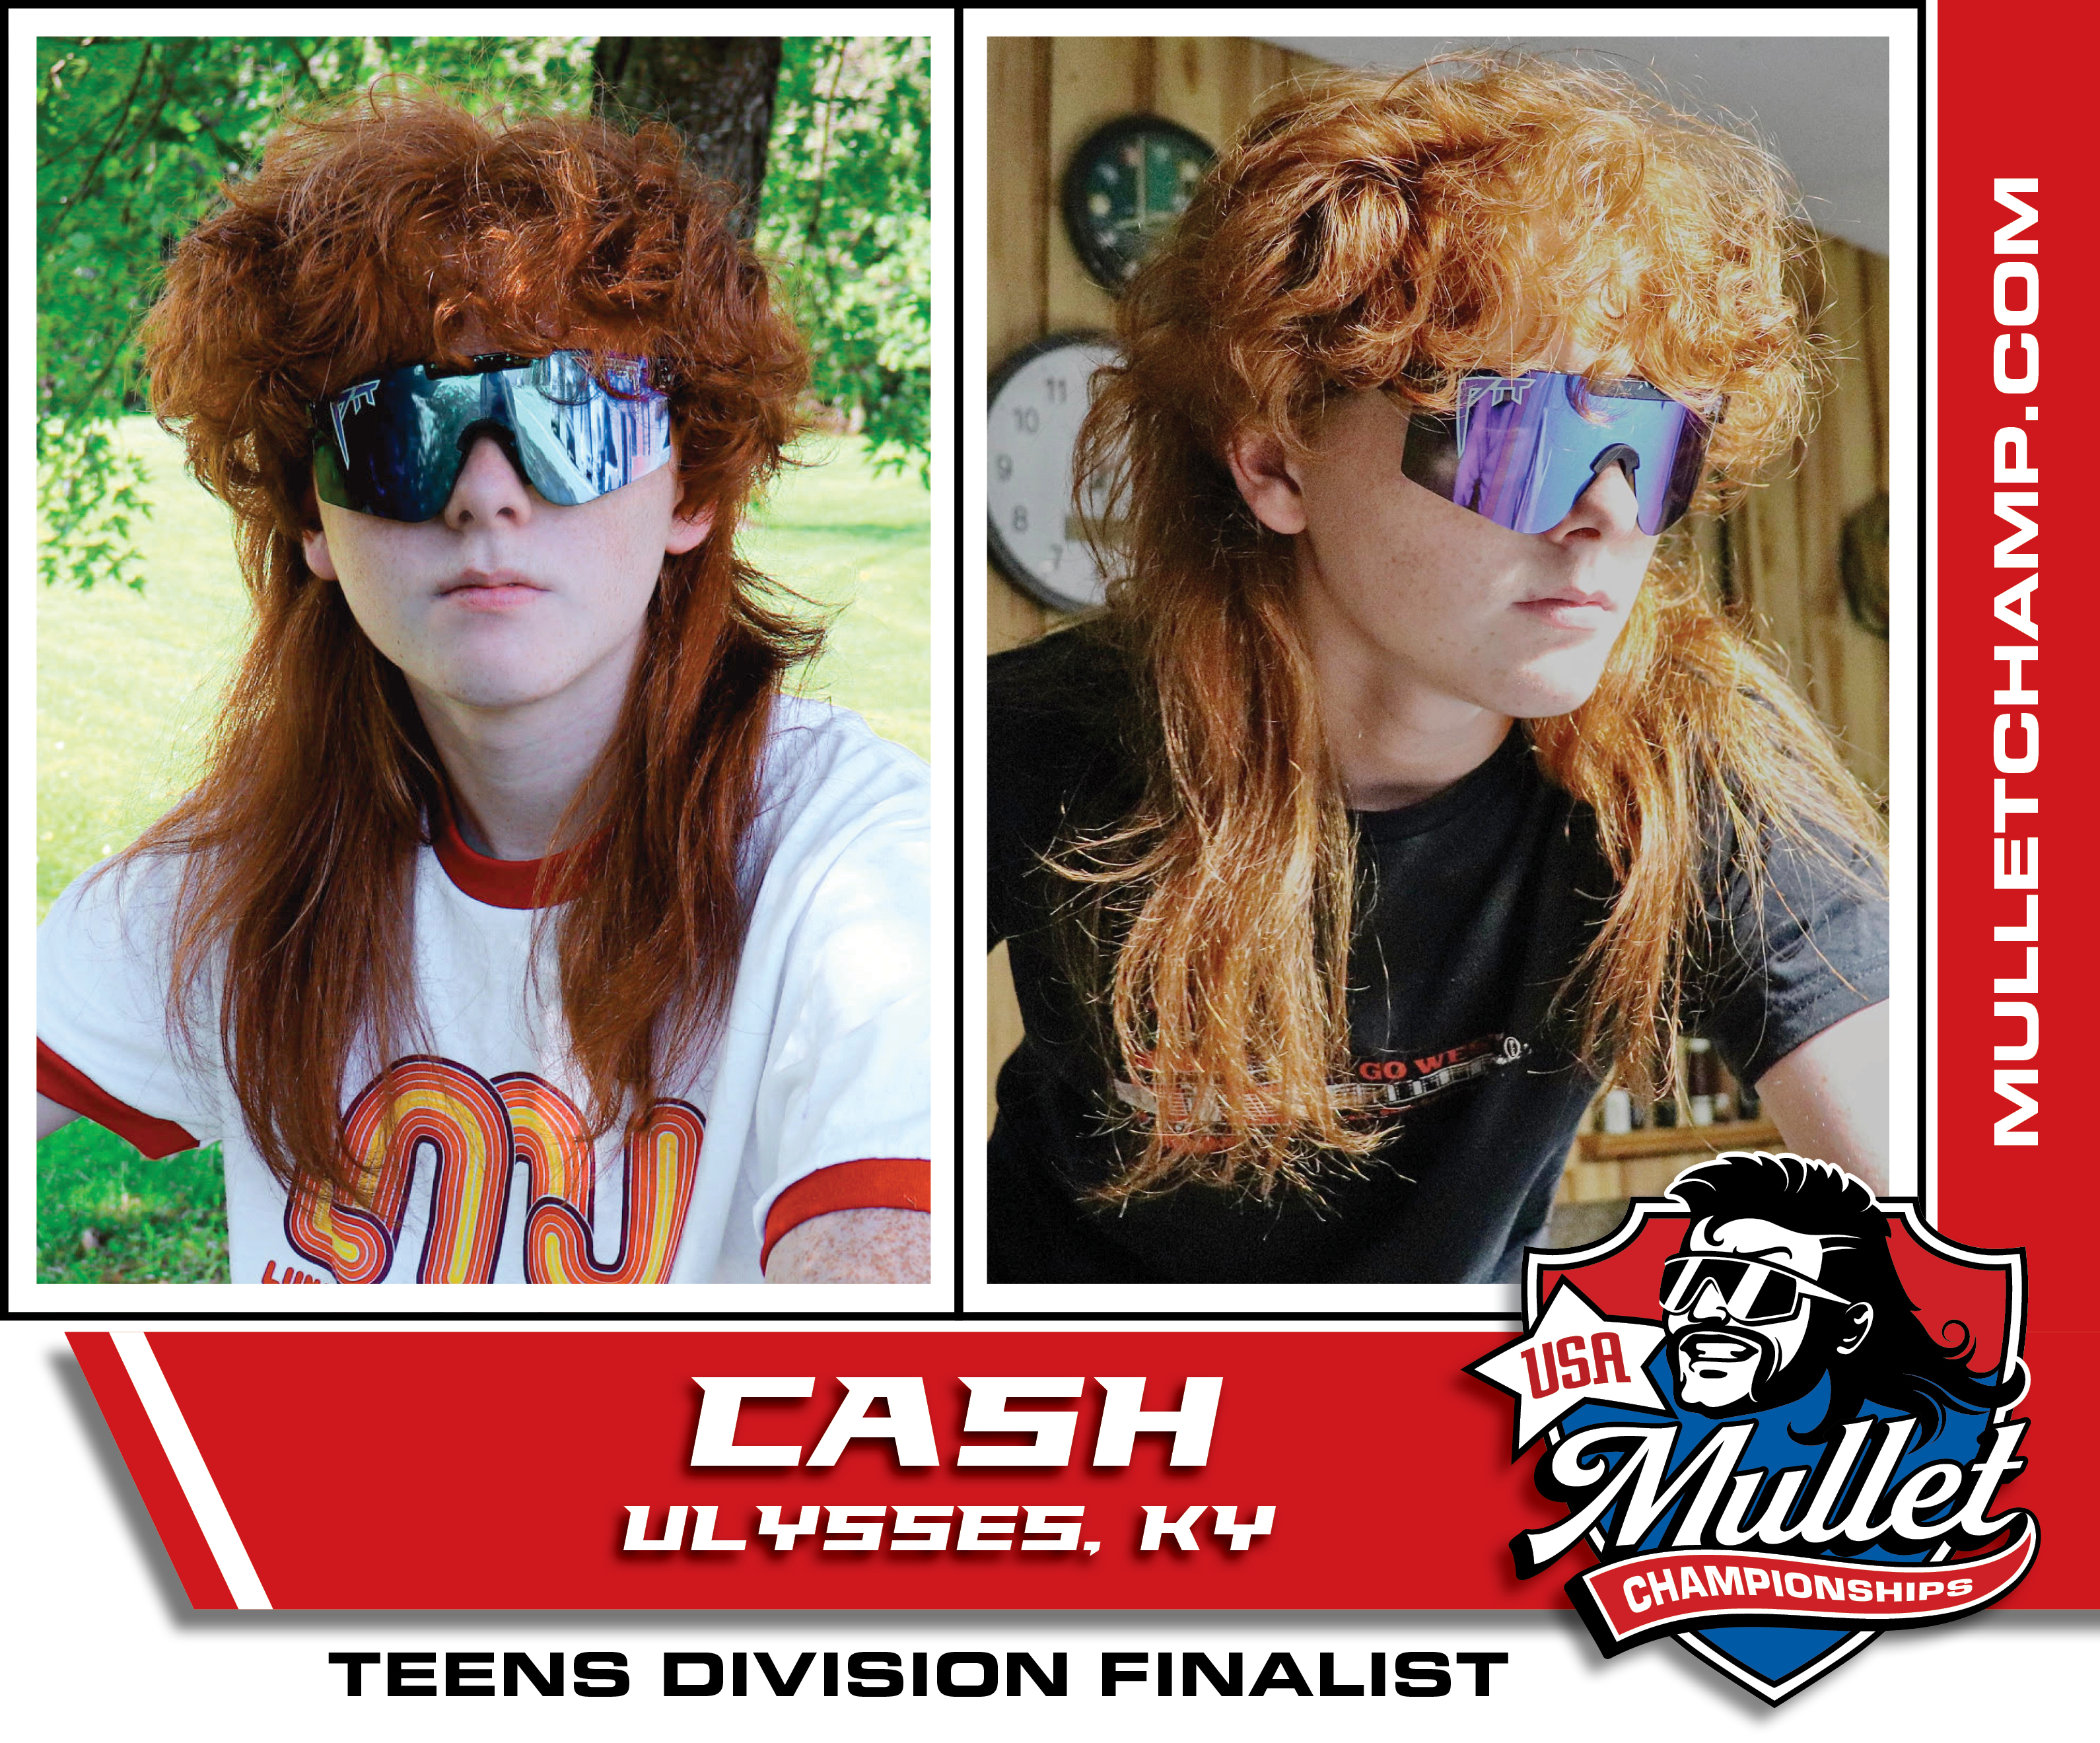 Cash McCoy, a teen division finalist in the 2022 USA Mullet Championships.